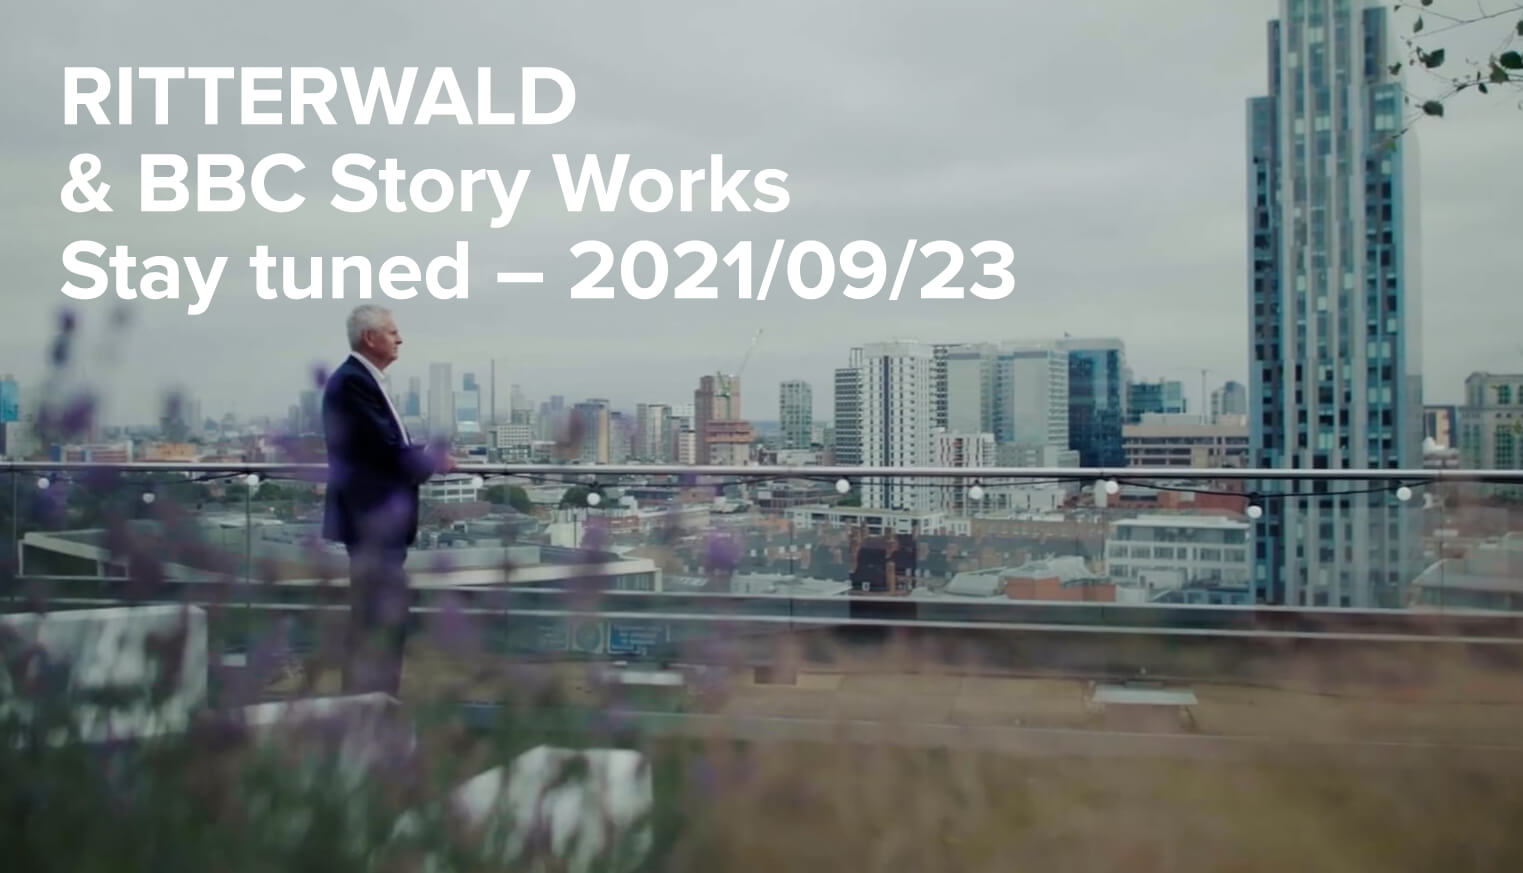 RITTERWALD & BBC Story Works: Stay tuned – 2021/09/23